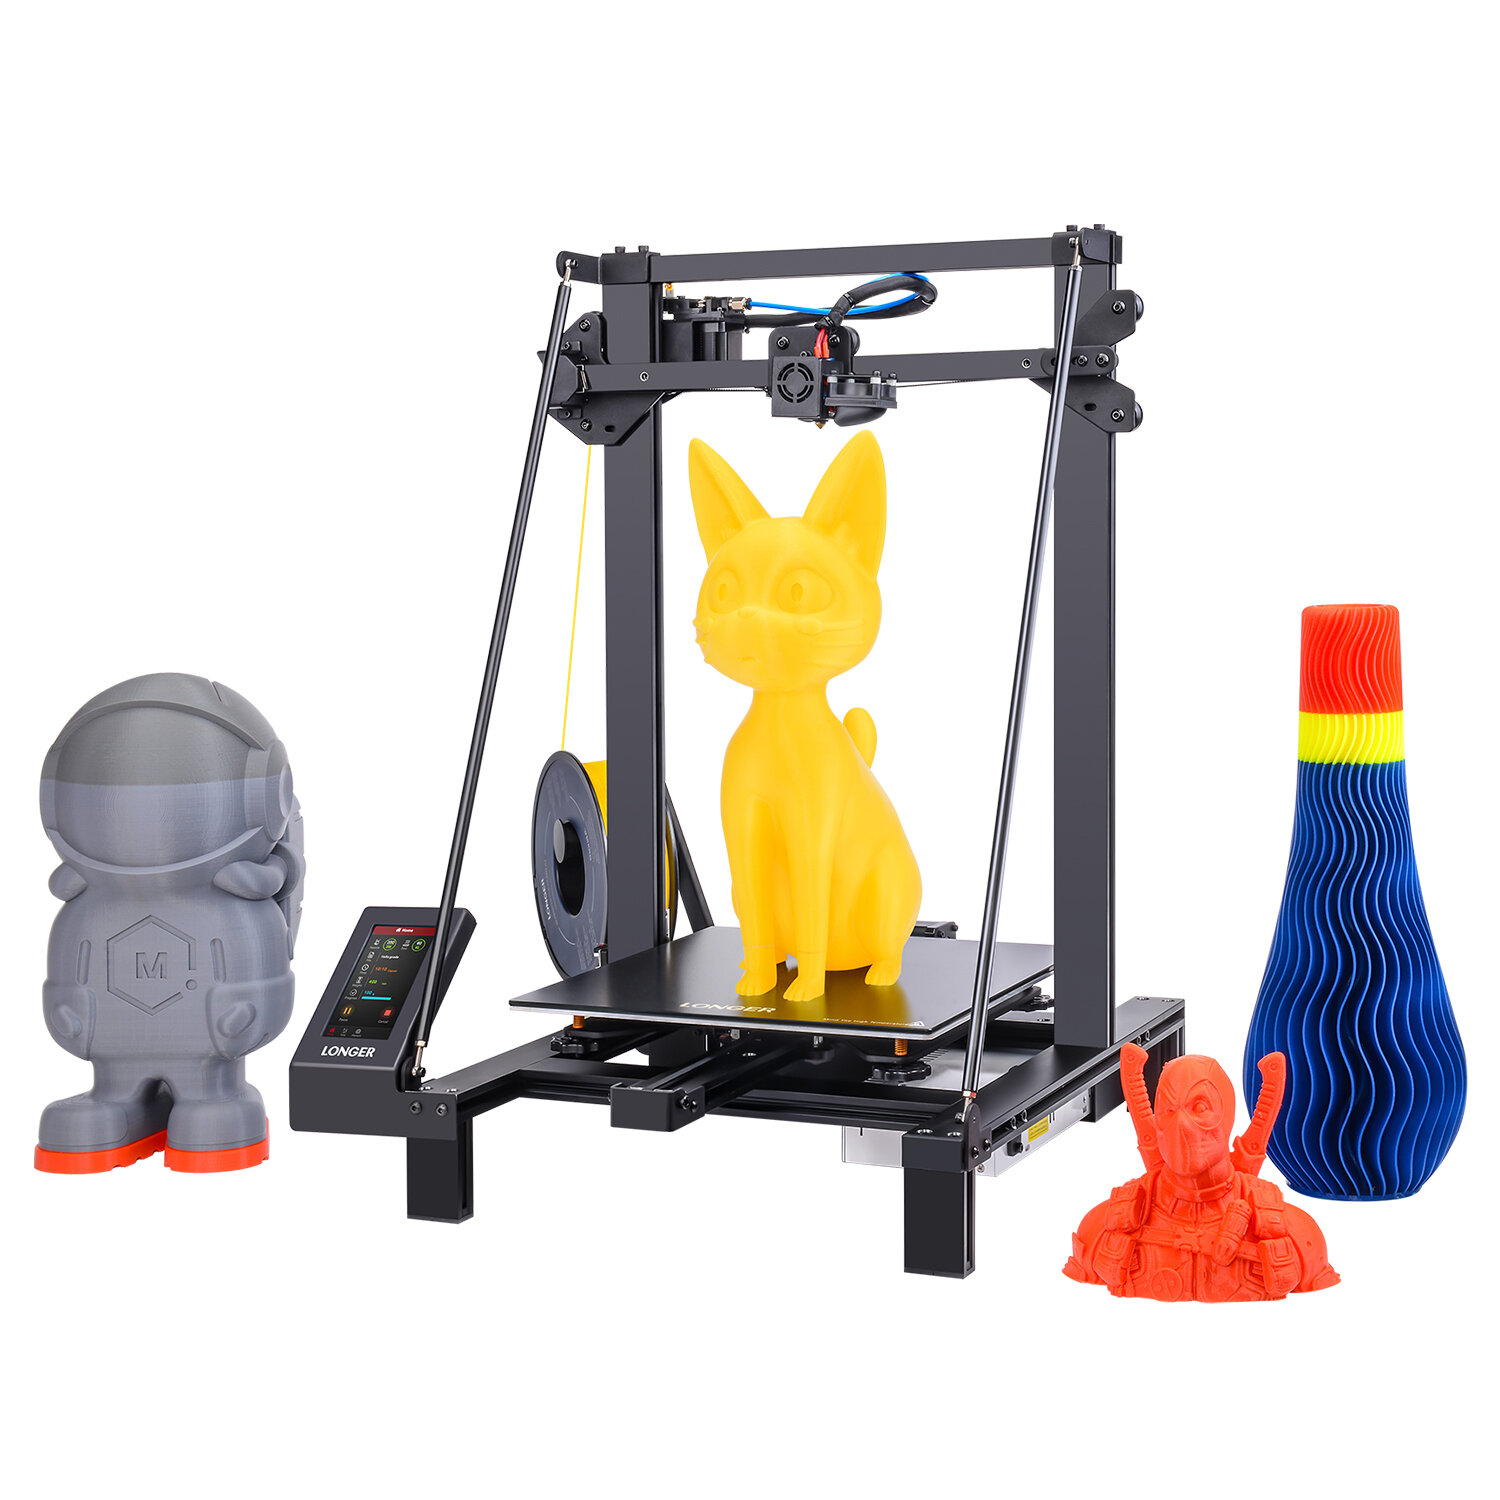 LONGER® LK5 PRO FDM 3D Printer Kit 300x300x400mm Print Size 90% Pre-assembled/Large Format/Double Diagonal Ties/ with Lattice Glass Equipped/Silent and Open source Motherboard